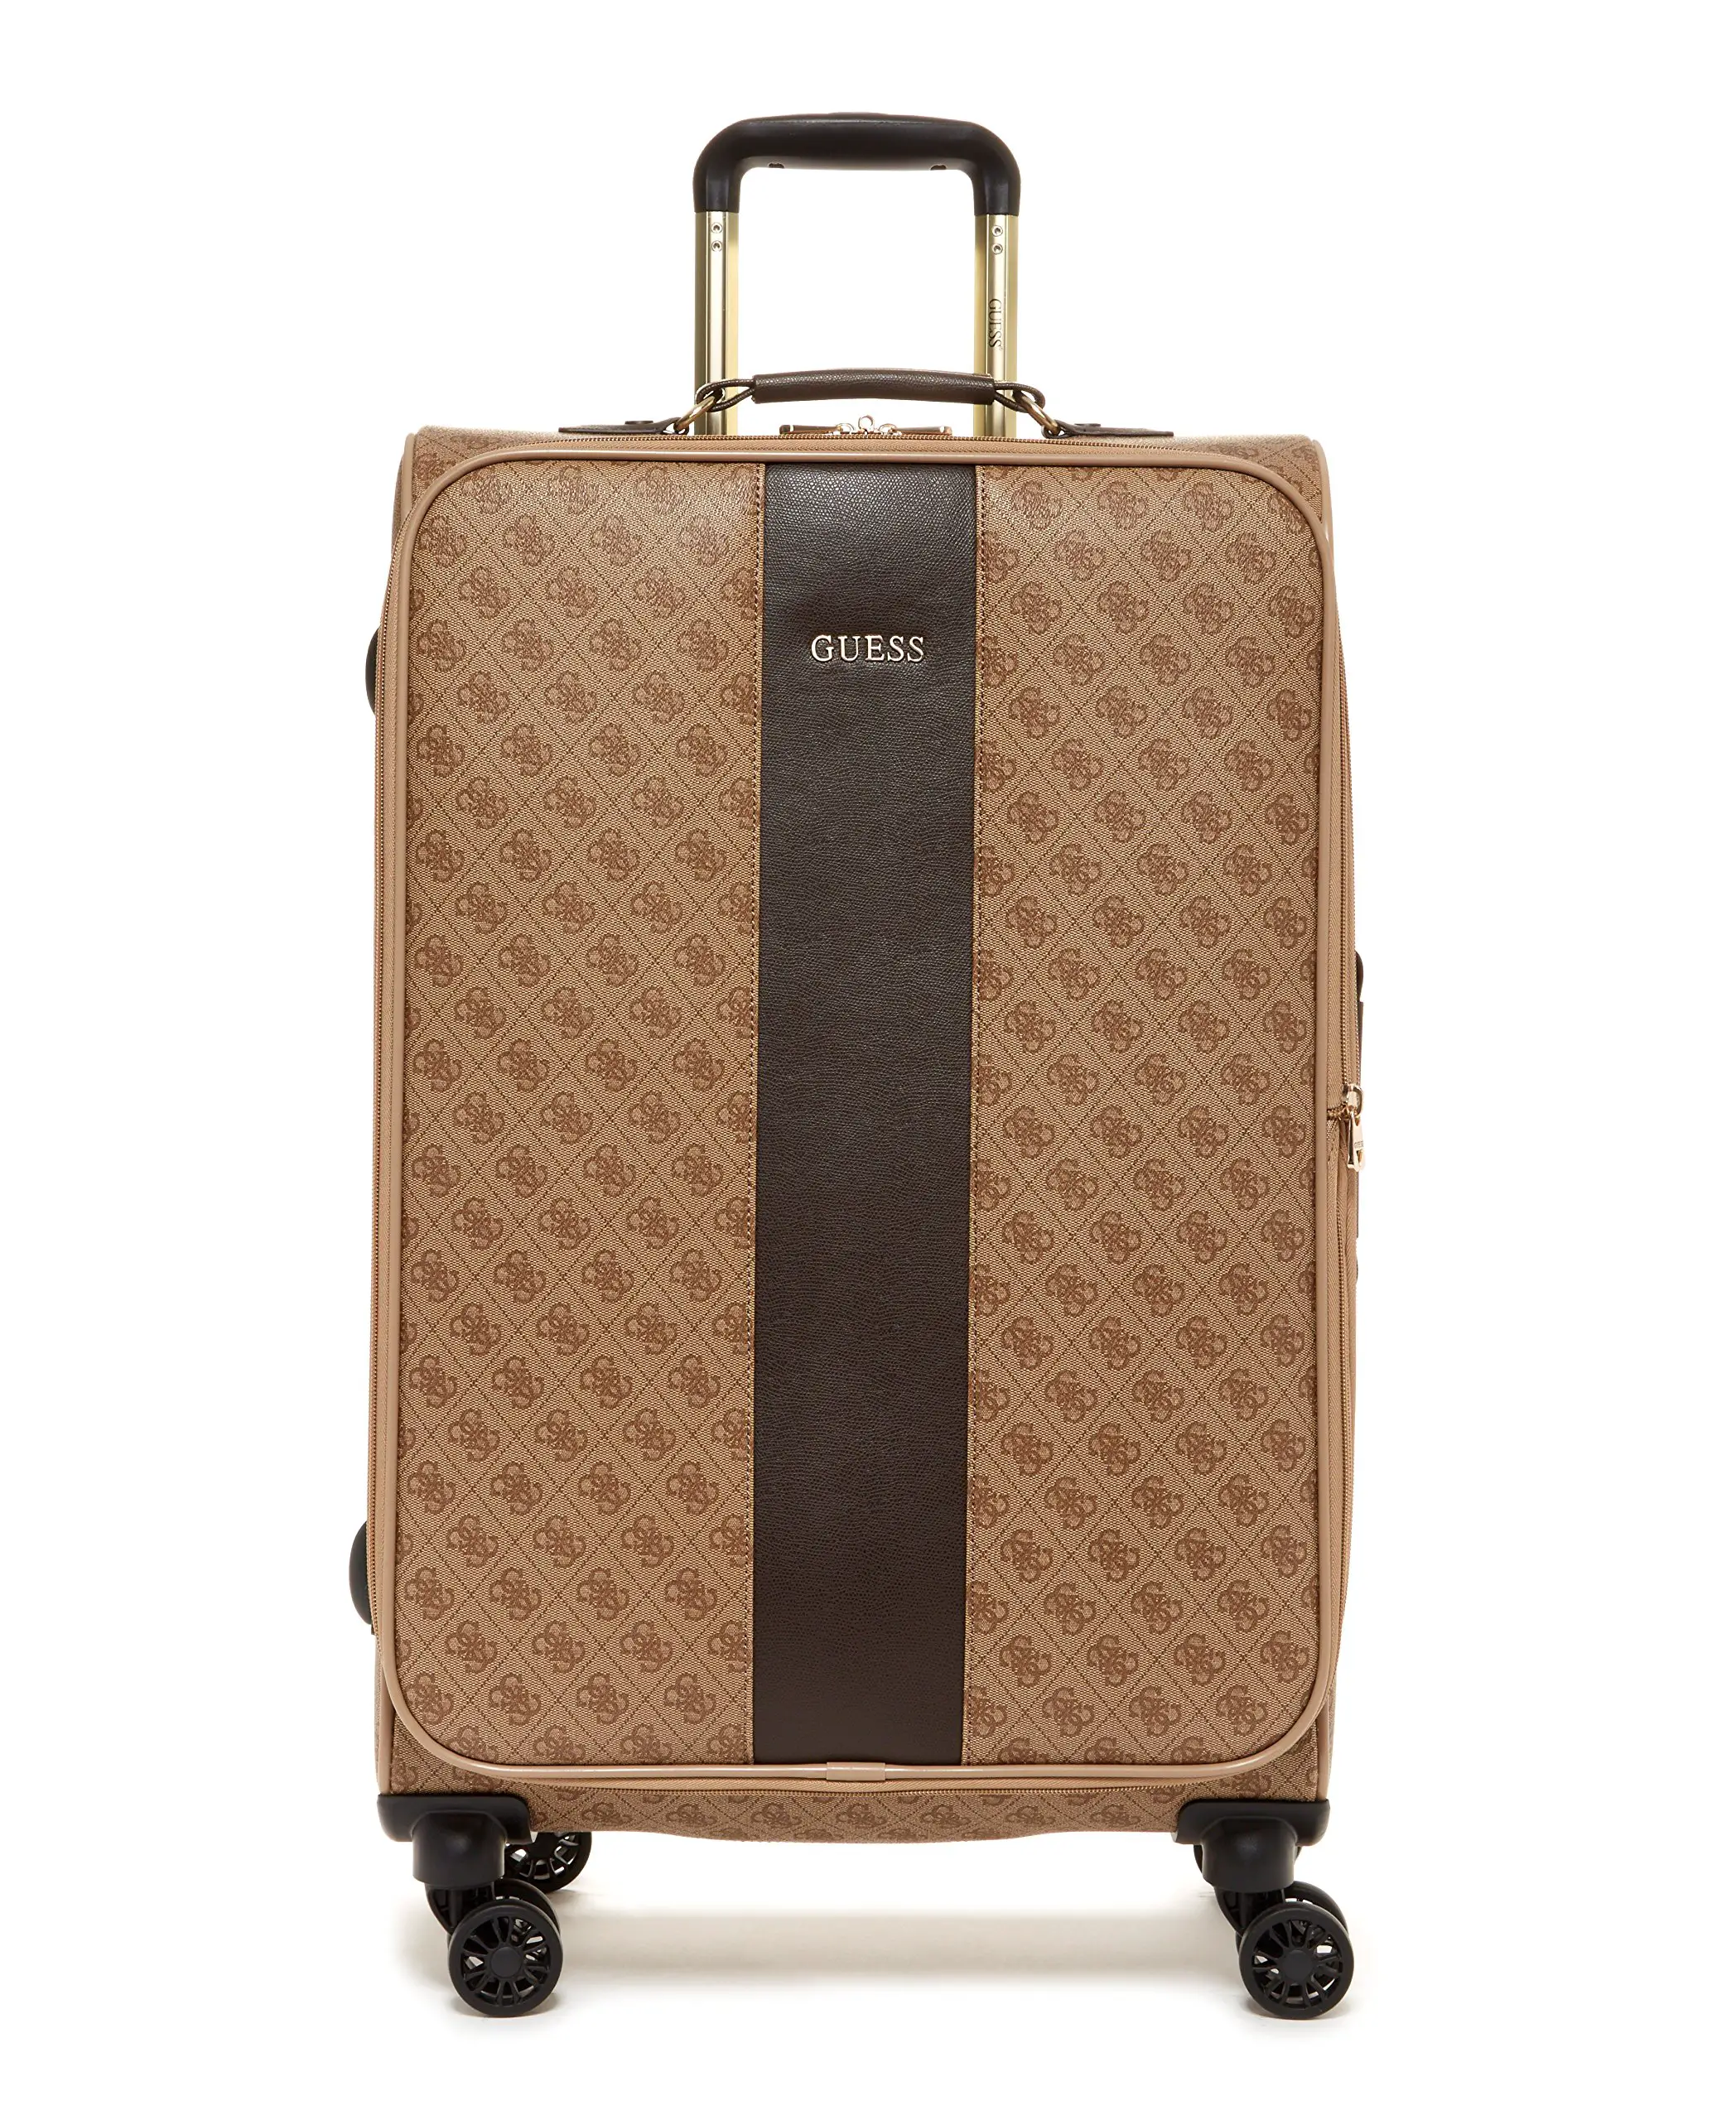 Paris Chic Style Guess Nissana 28 Inch Best Travel Luggage Check In Soft Shell Lightweight Suitcase Four Wheels spinner